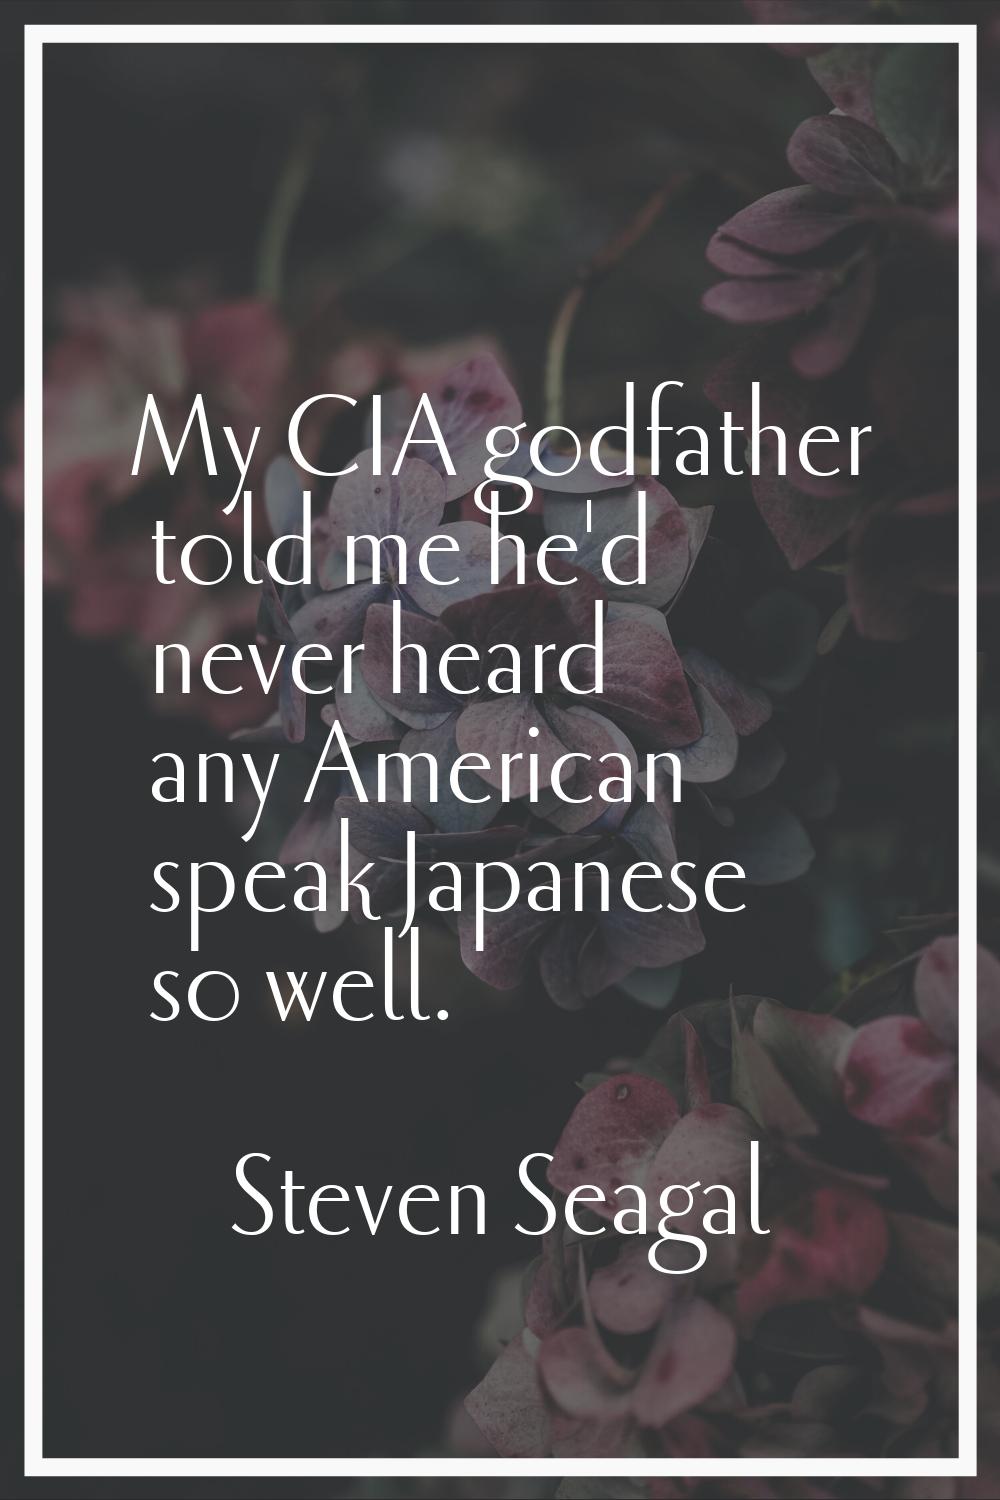 My CIA godfather told me he'd never heard any American speak Japanese so well.